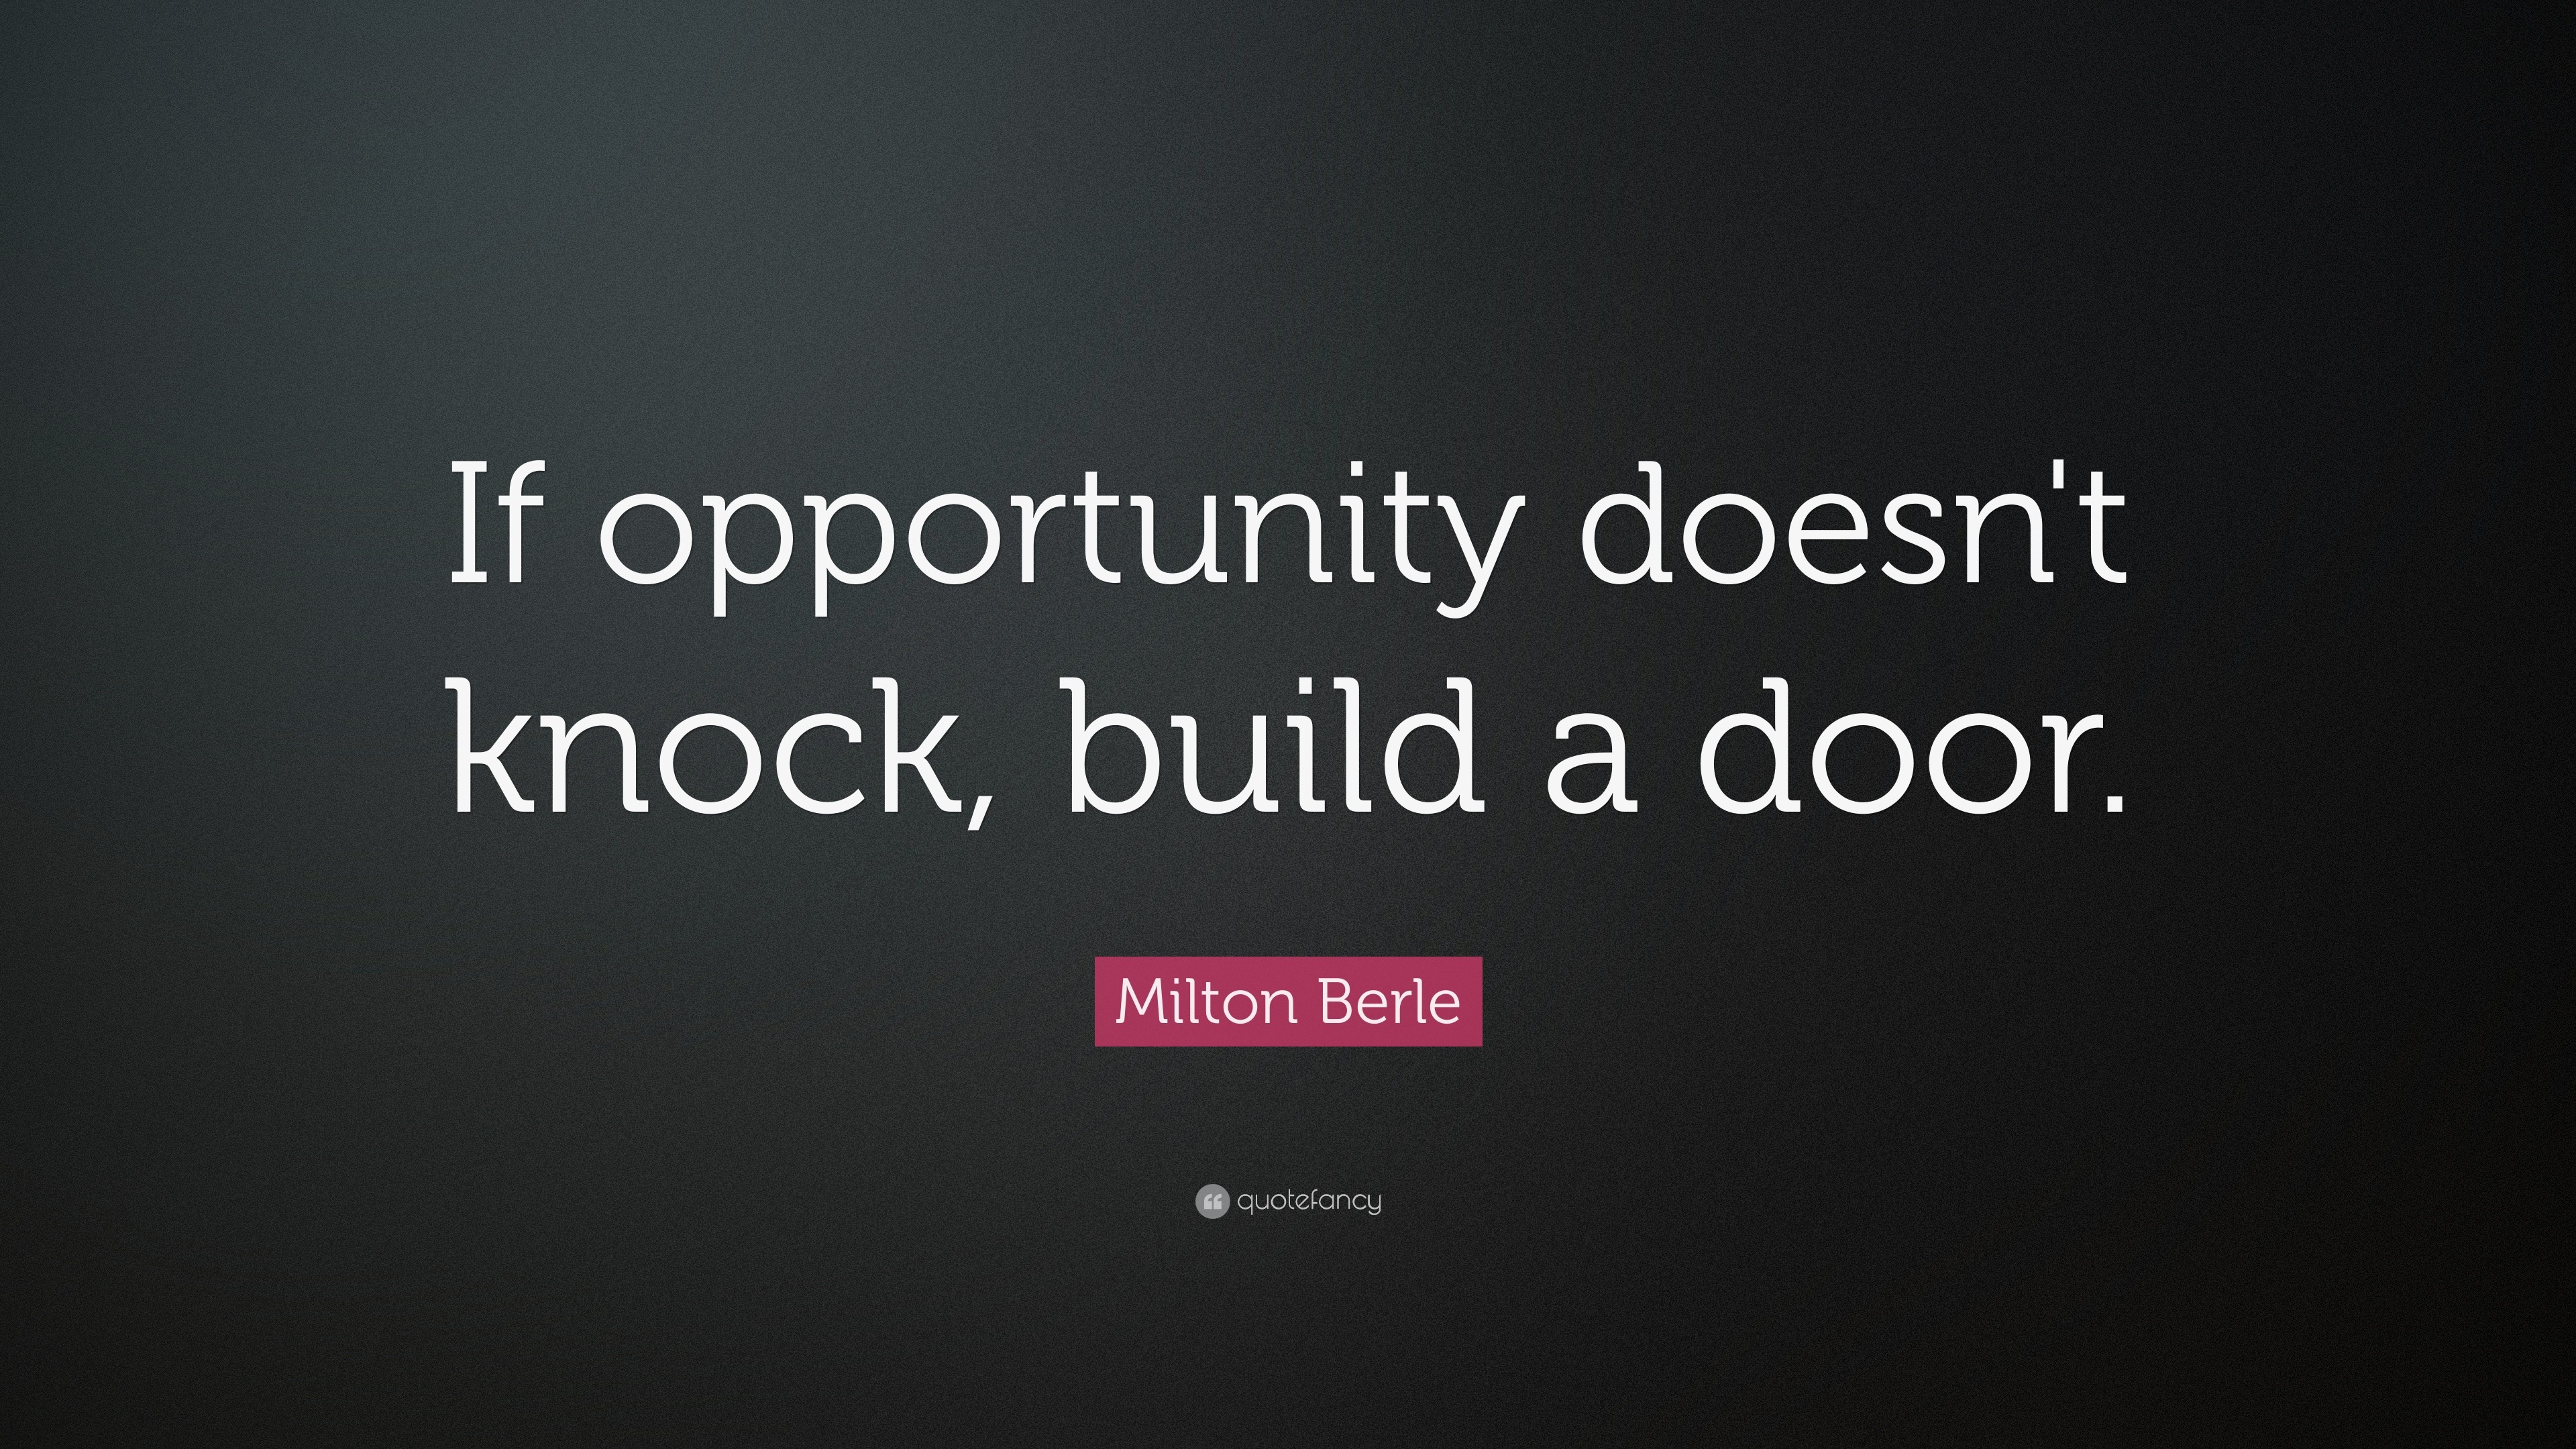 3840x2160 Positive Quotes: “If opportunity doesn't knock, build a door.”